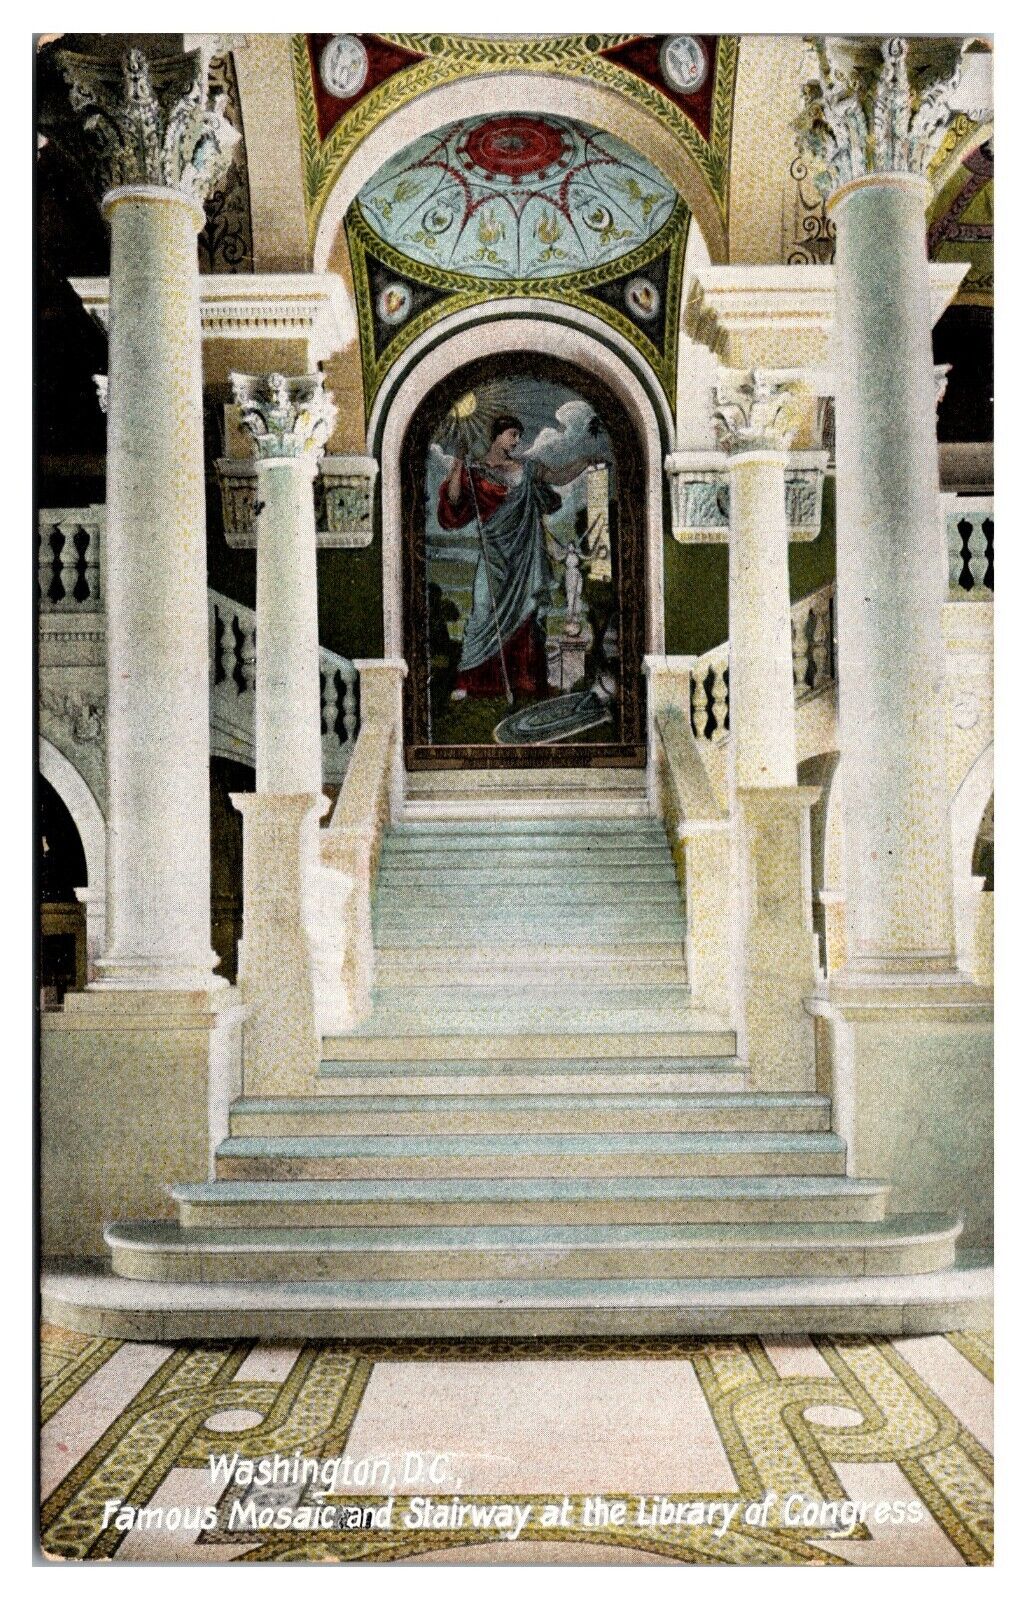 Antique Famous Mosaic and Stairway at the LOC, Washington, DC Postcard